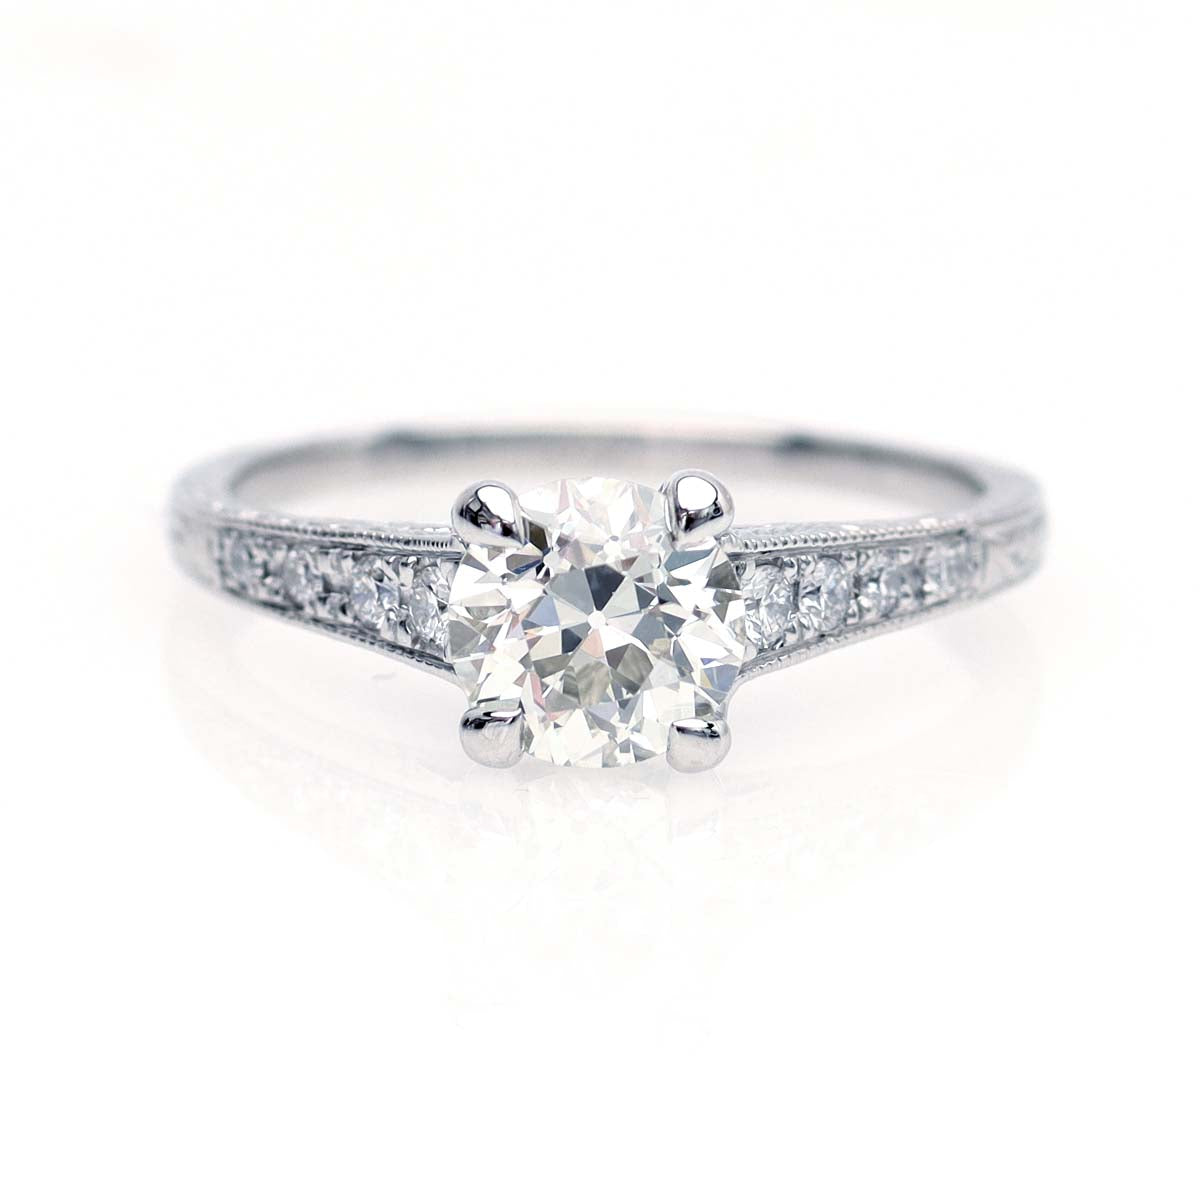 The Malen Engagement Ring #3042-1